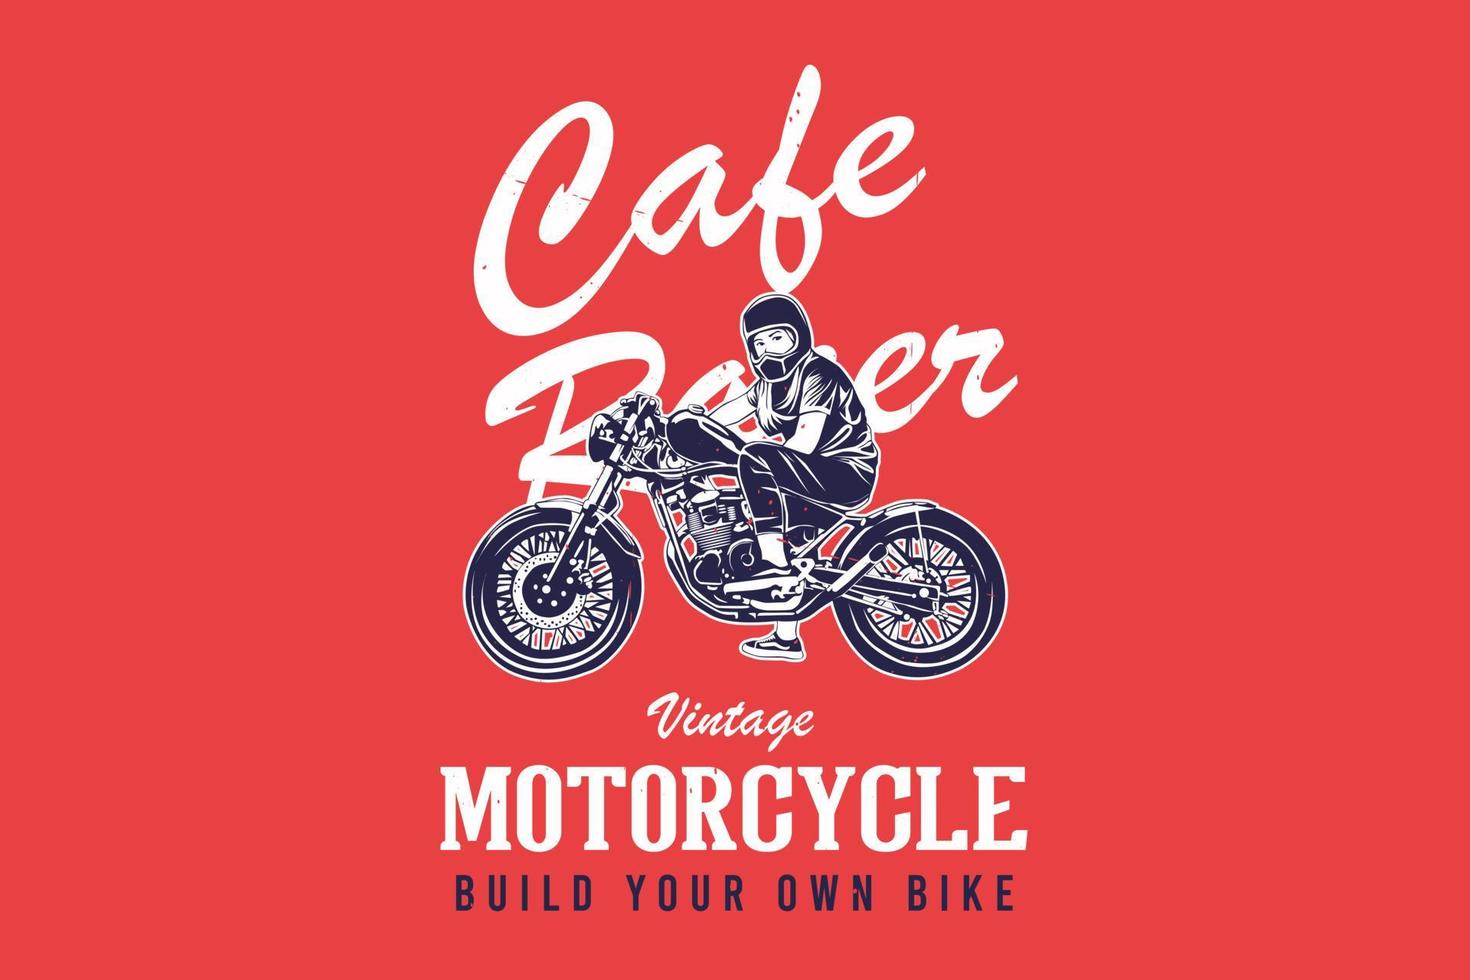 Cafe racer vintage motorcycle build your own bike silhouette design vector